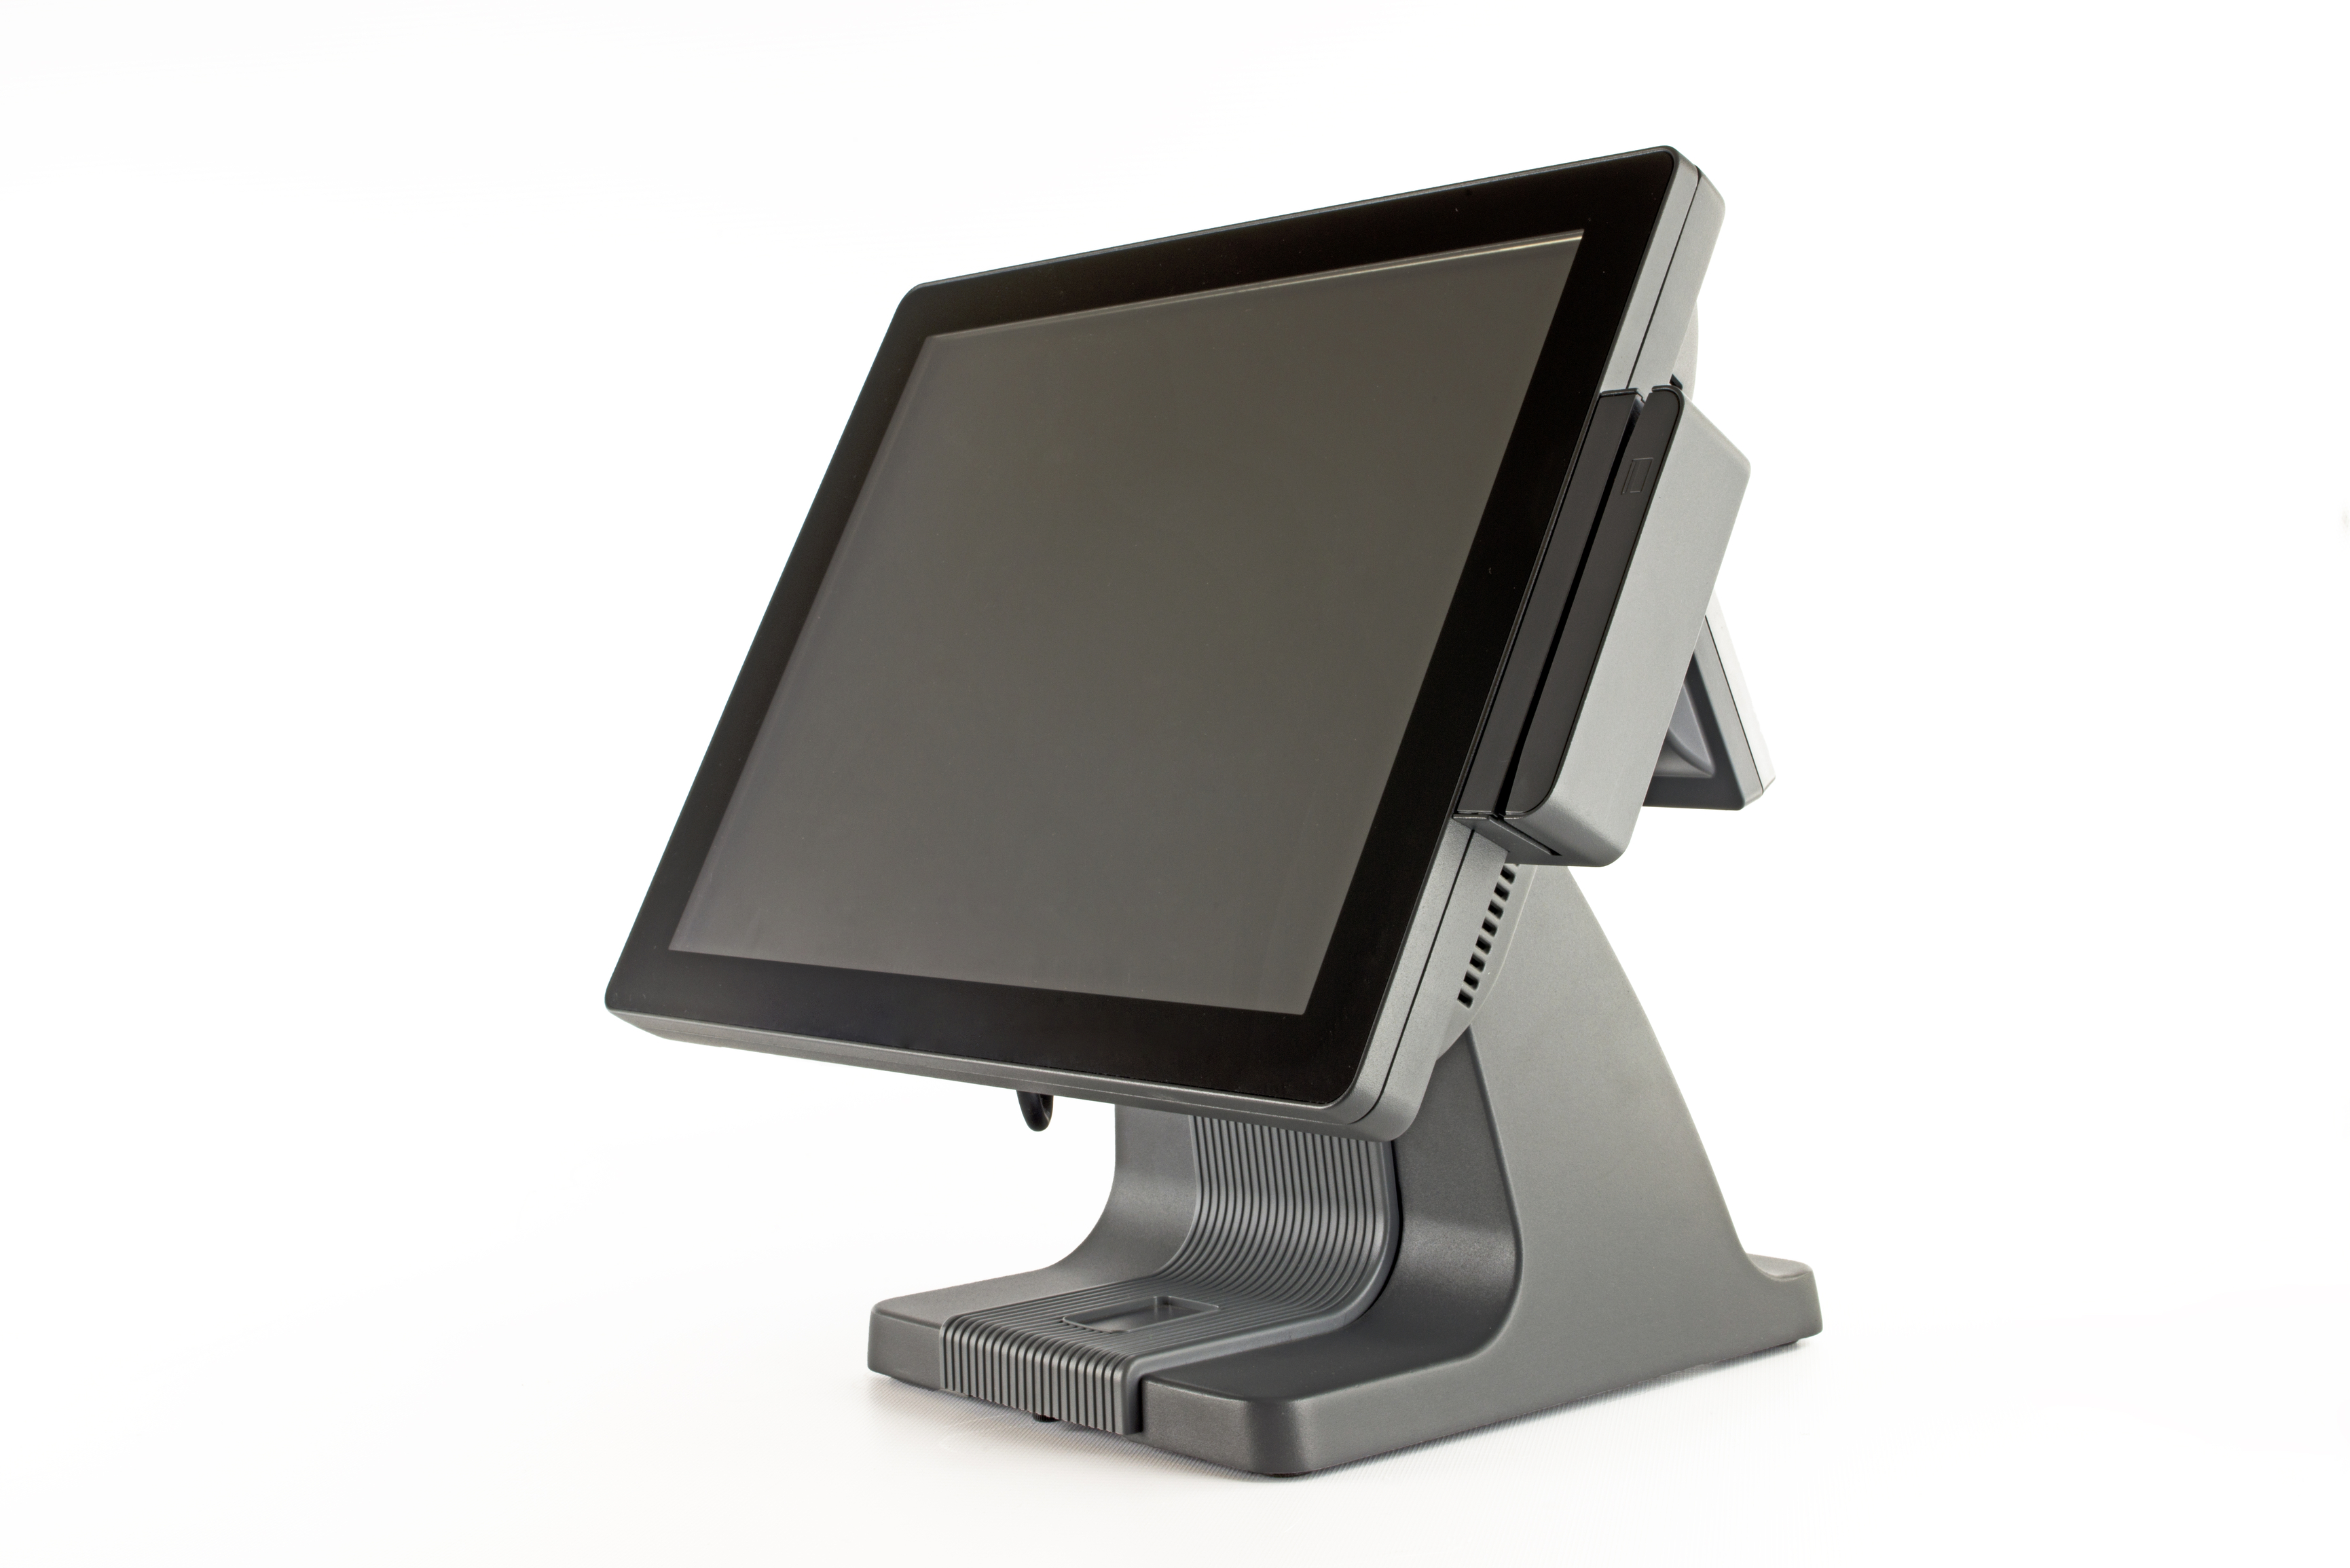 5 Mistakes to Avoid When Selecting a POS System – Part I